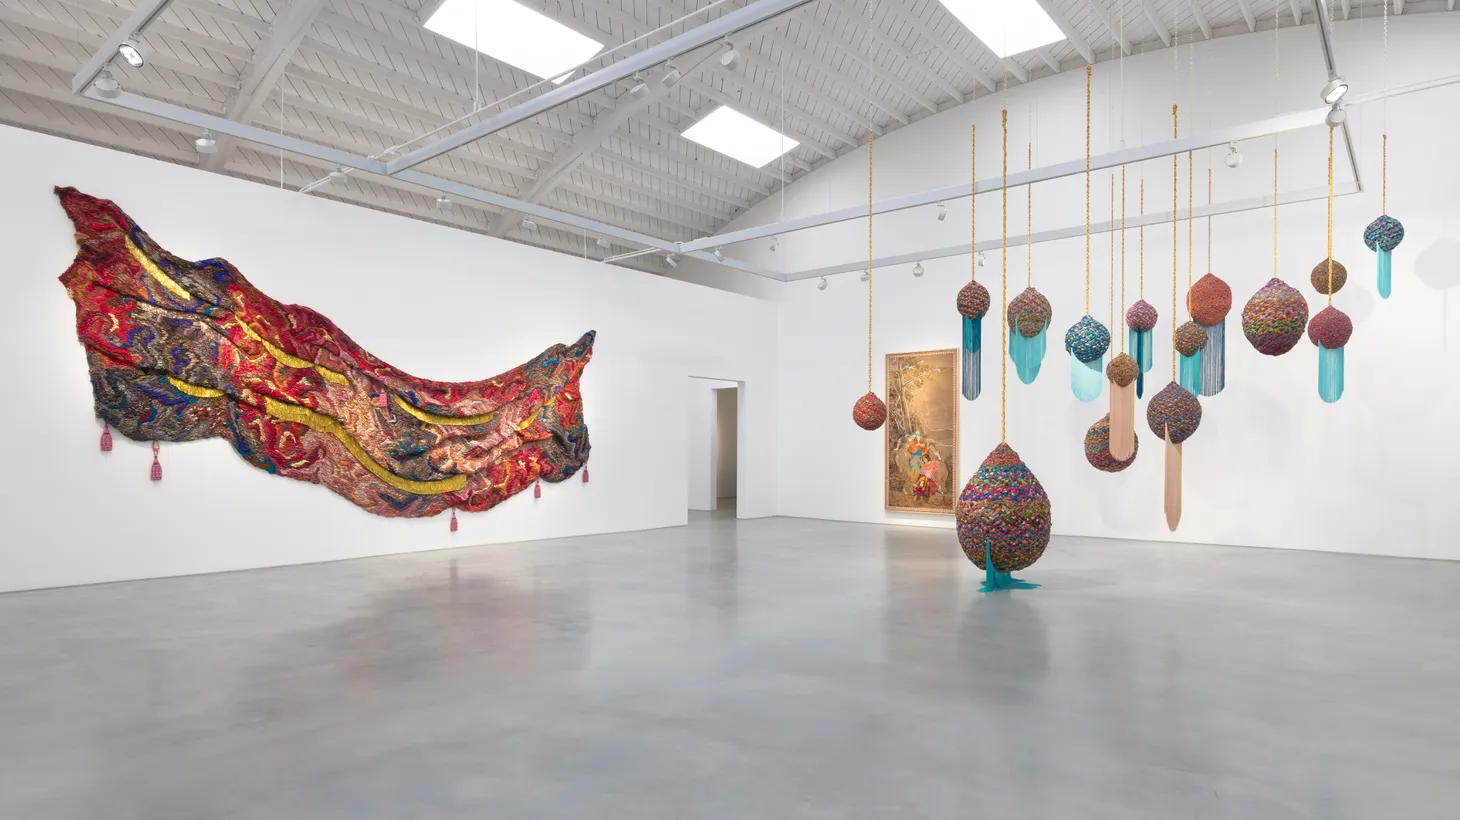 At Suchitra Mattai’s exhibition “In the absence of power, In the presence of love,” she shows all kinds of inventive weaving, creating soft sculptures, tapestries, and even long scrolls made from saris.